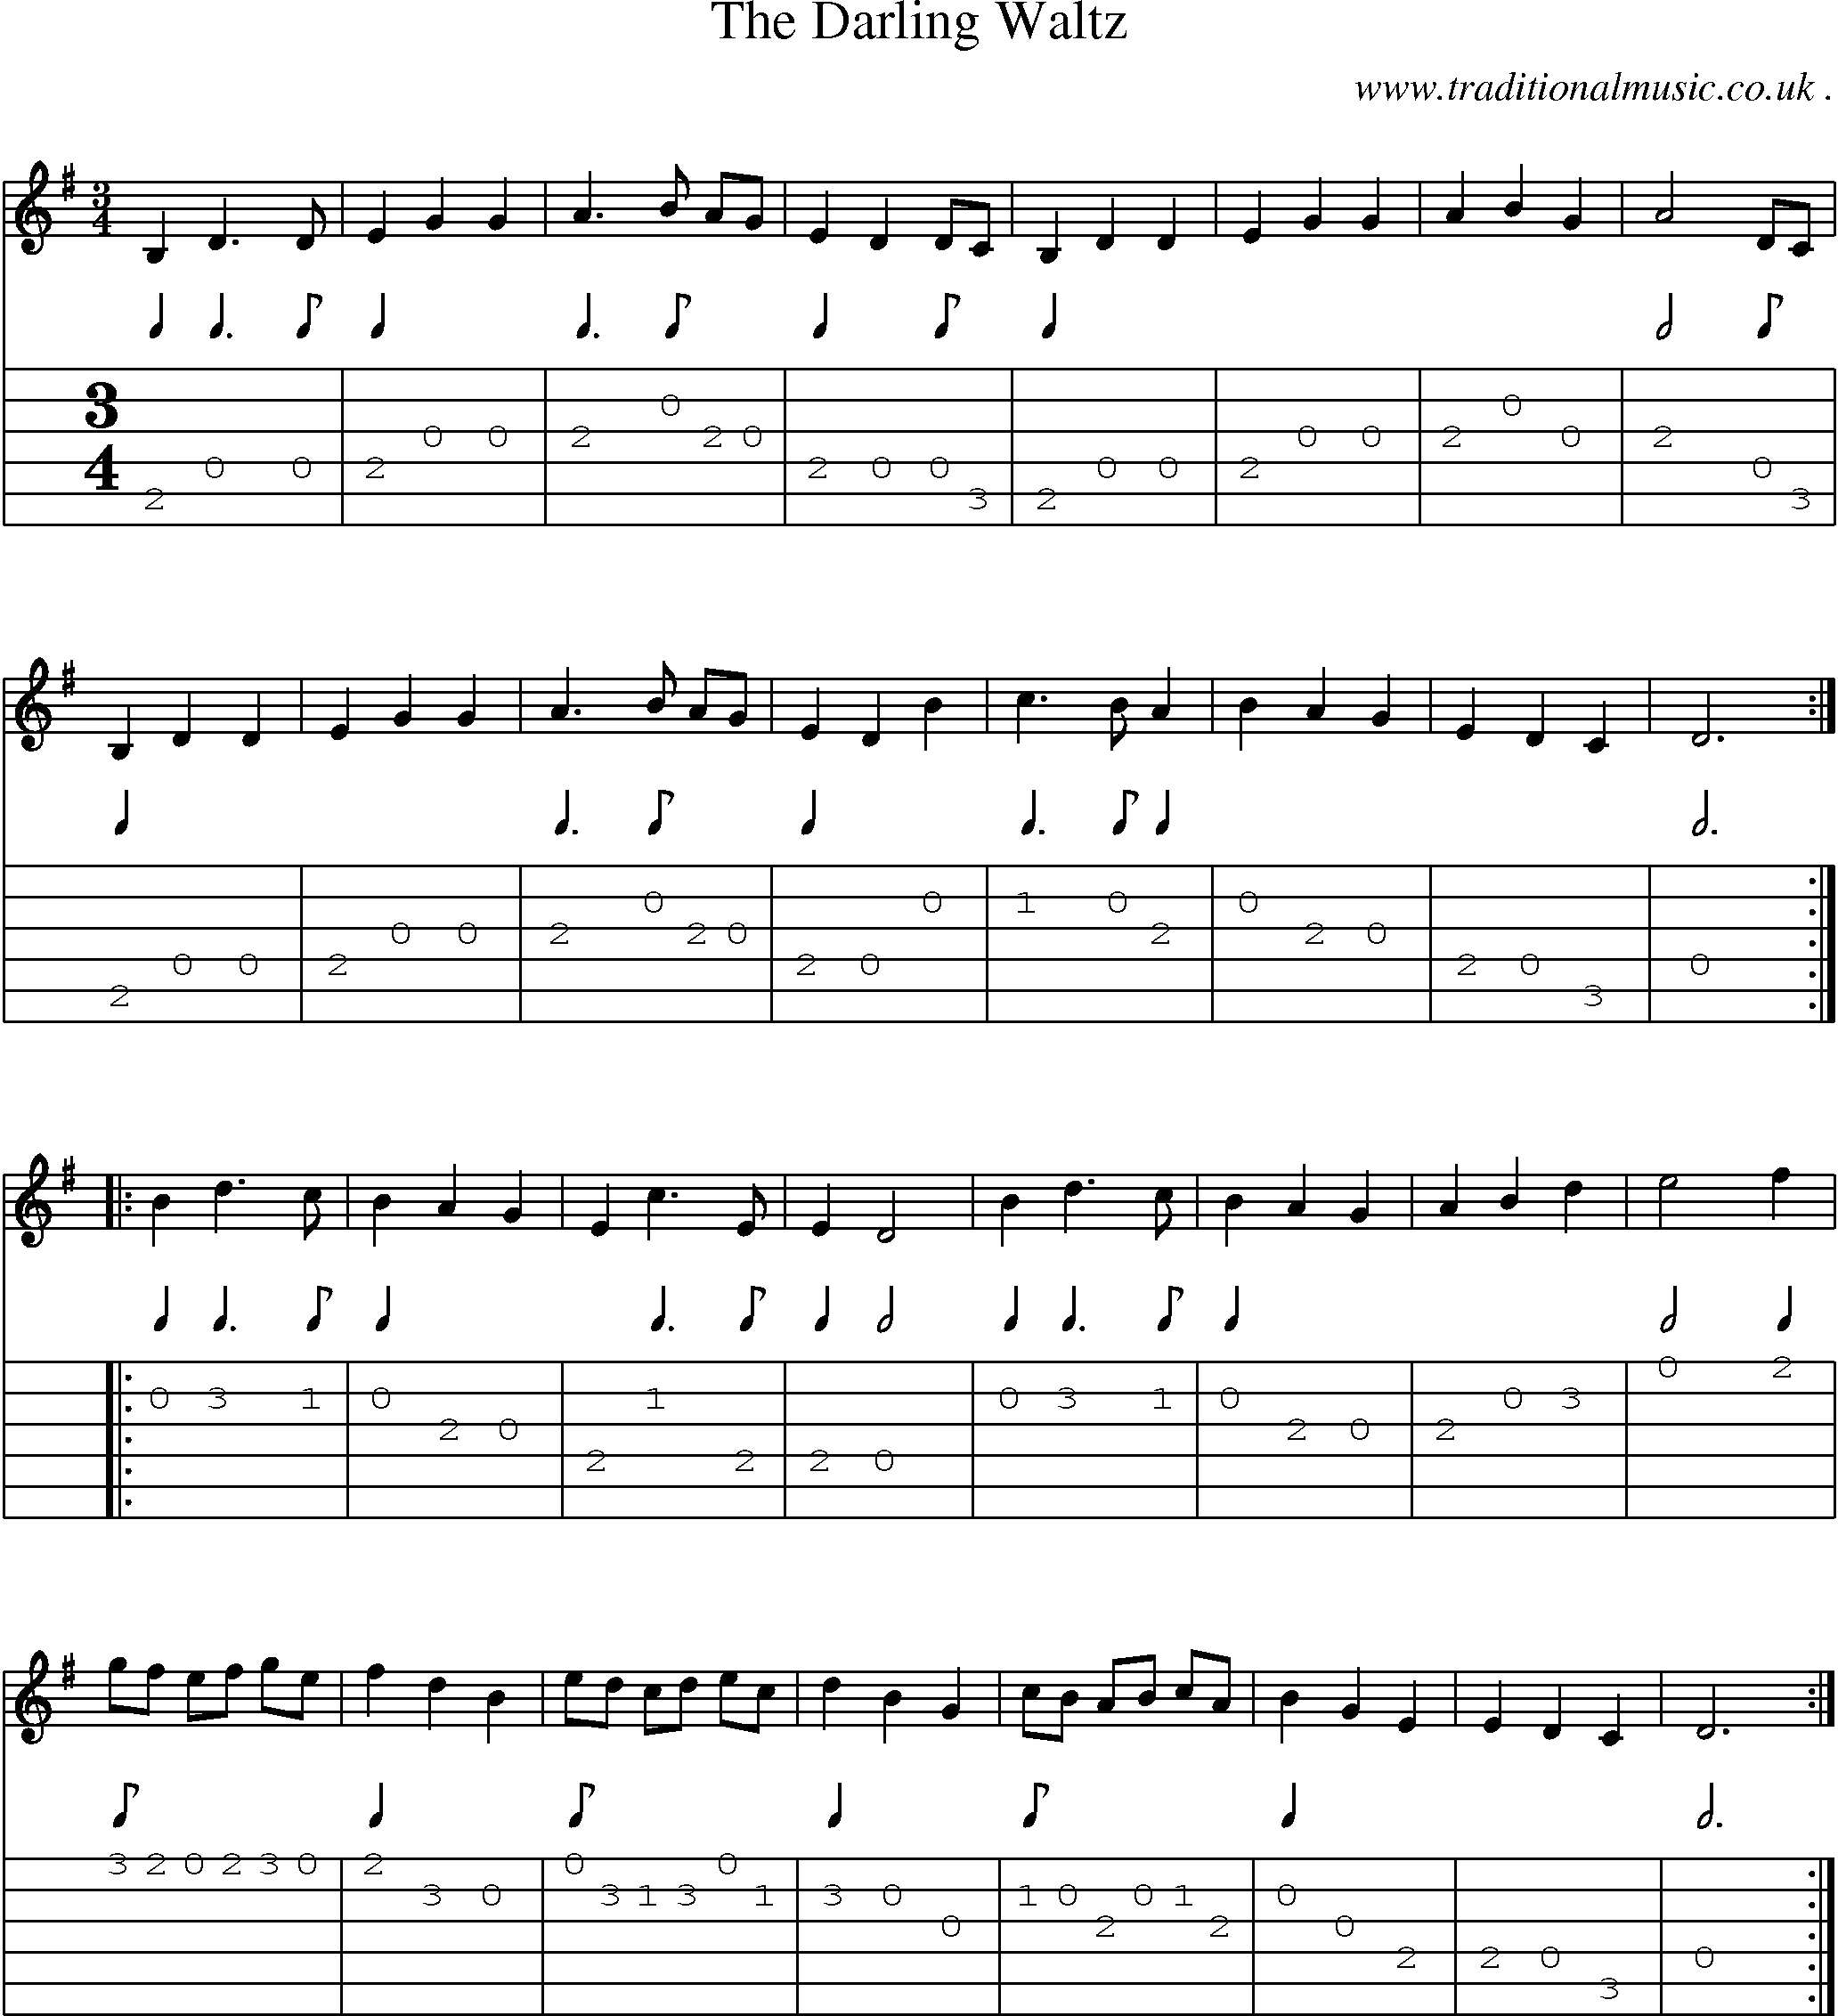 Sheet-Music and Guitar Tabs for The Darling Waltz